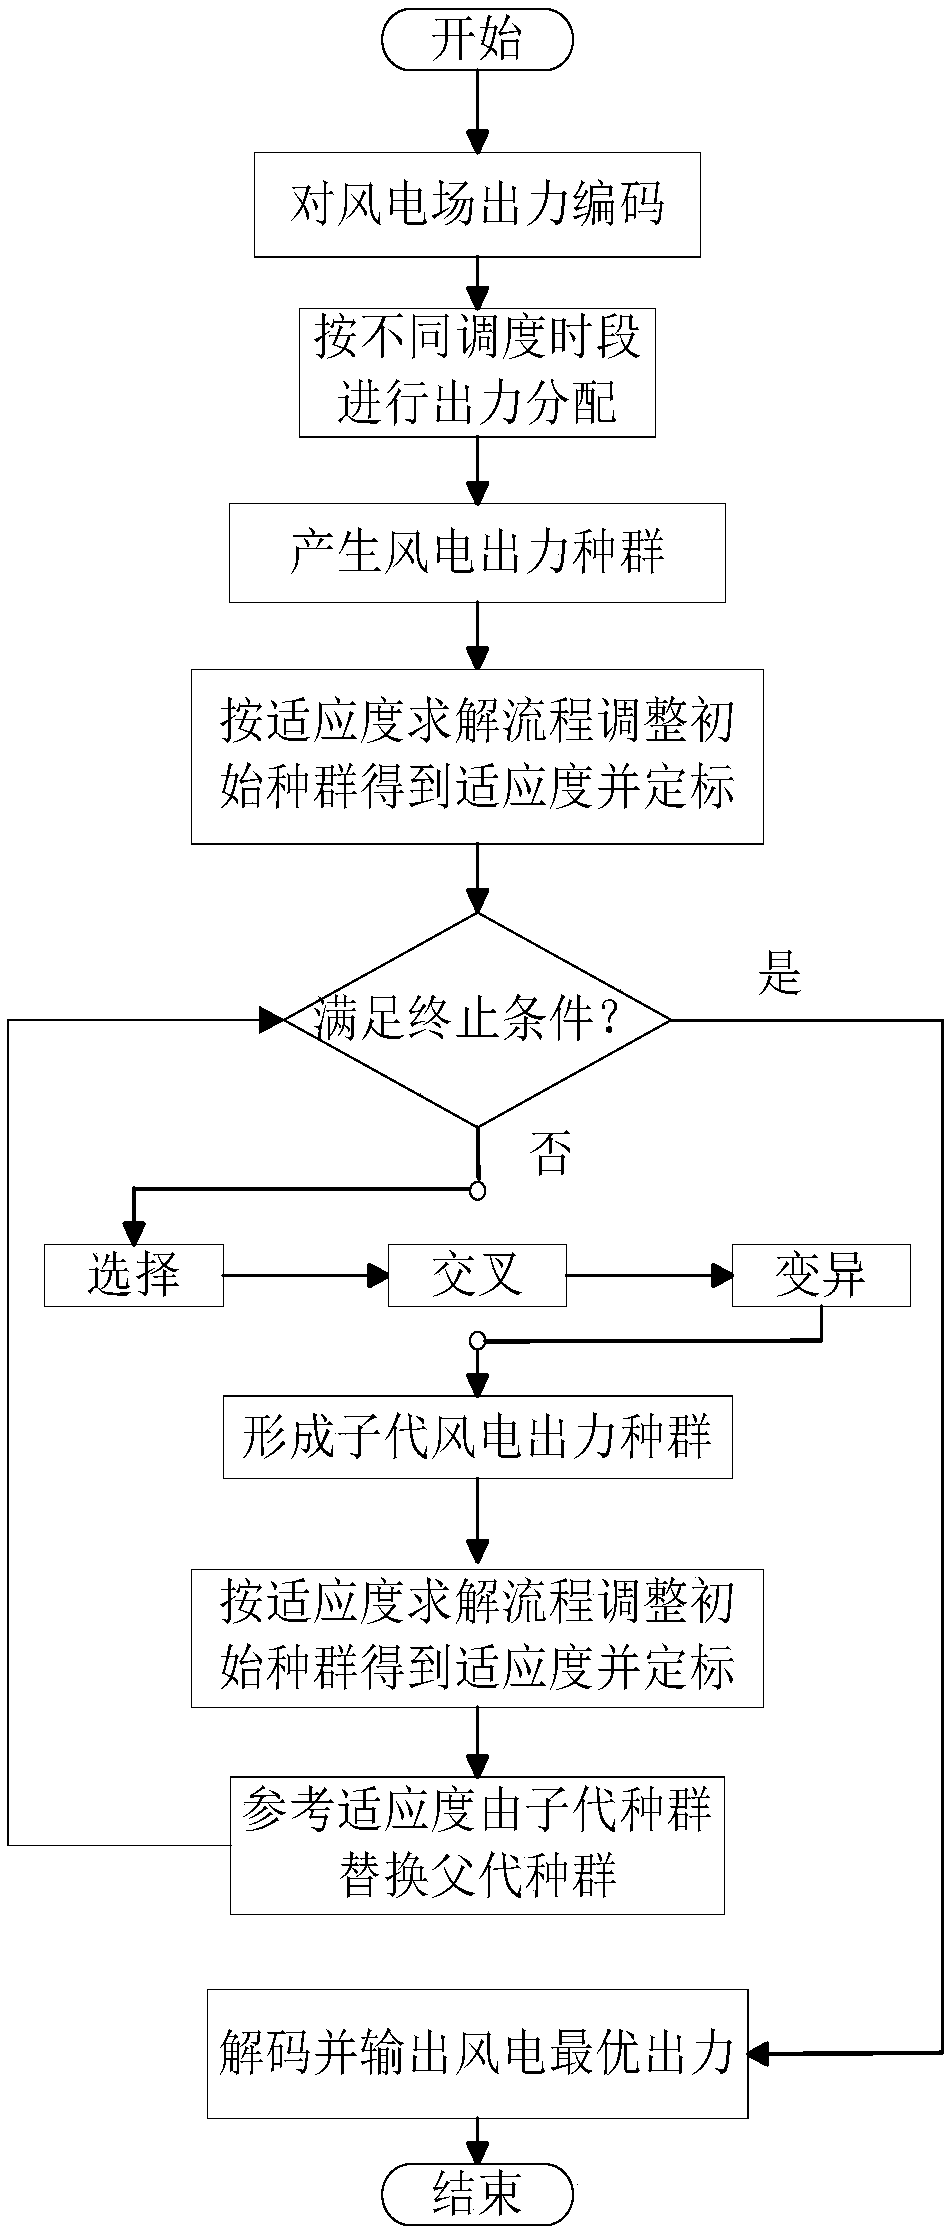 A power distribution method and system for a wind power cluster